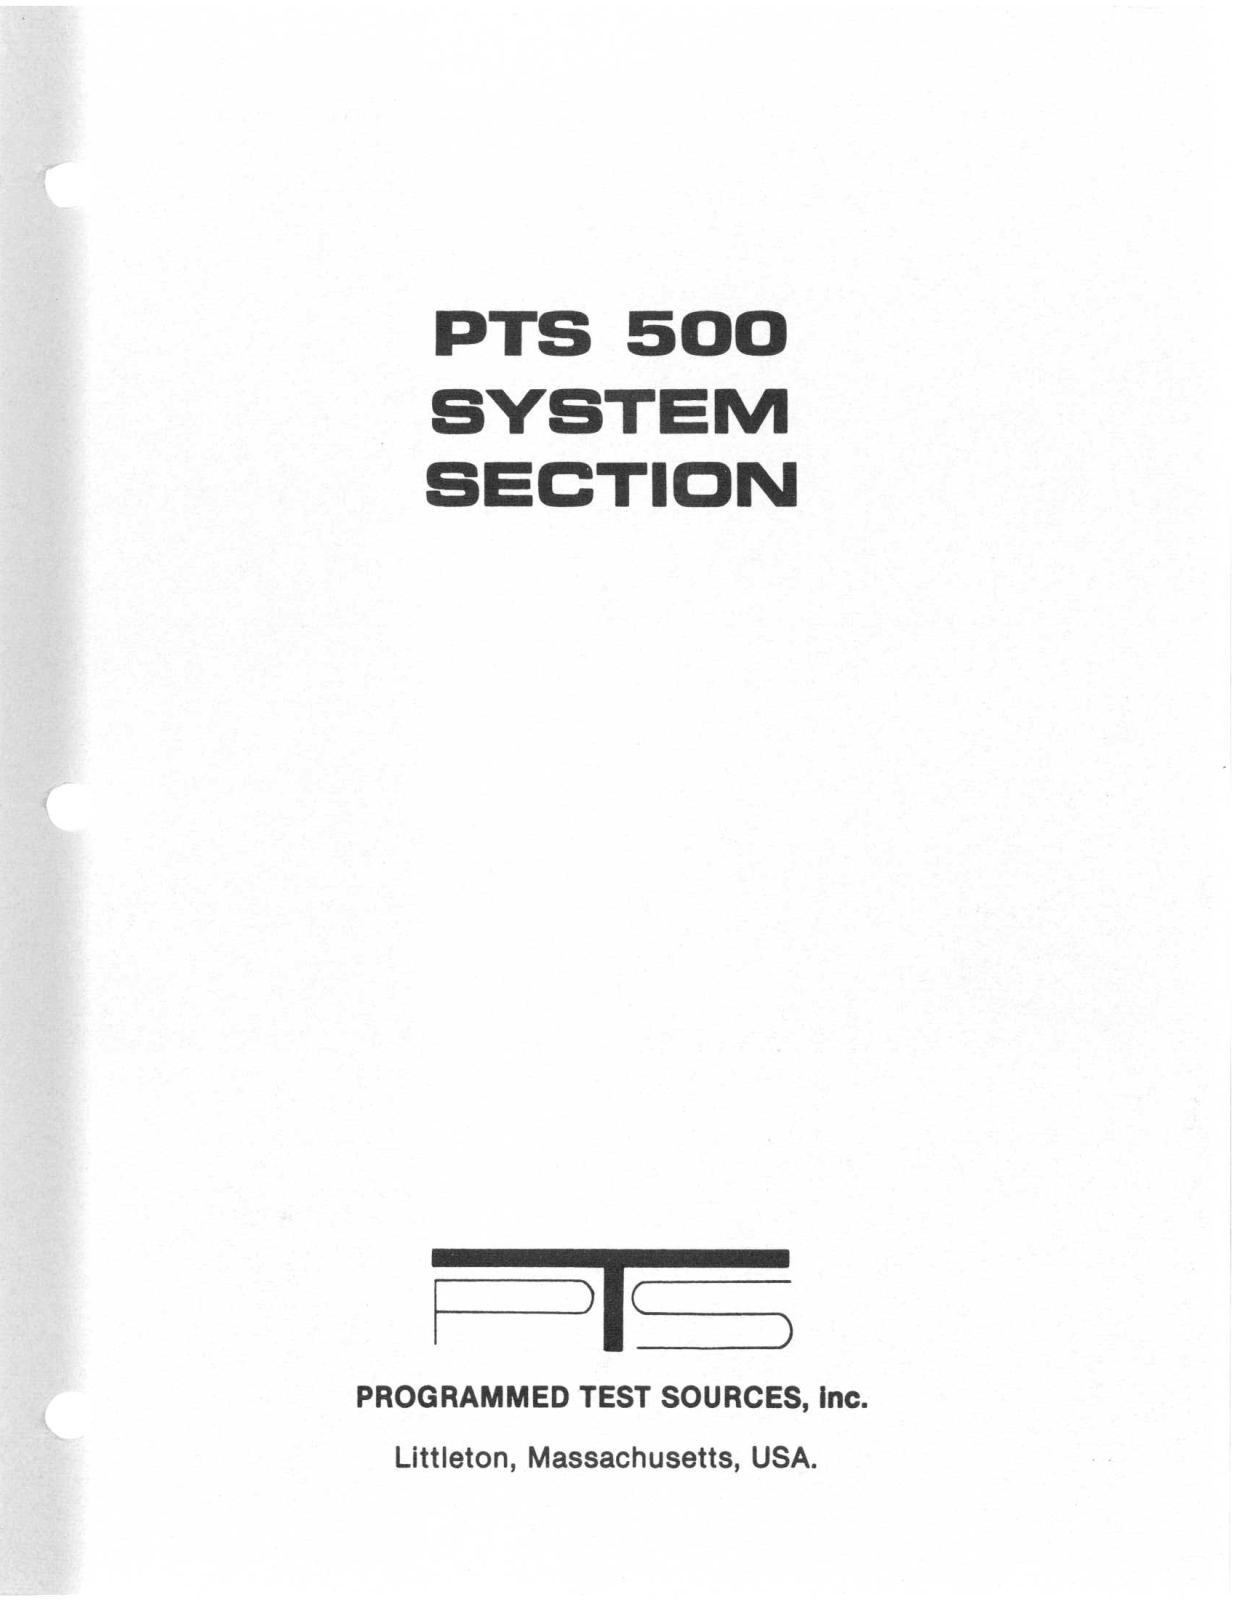 Programmed Test Sources PTS 500 Service manual